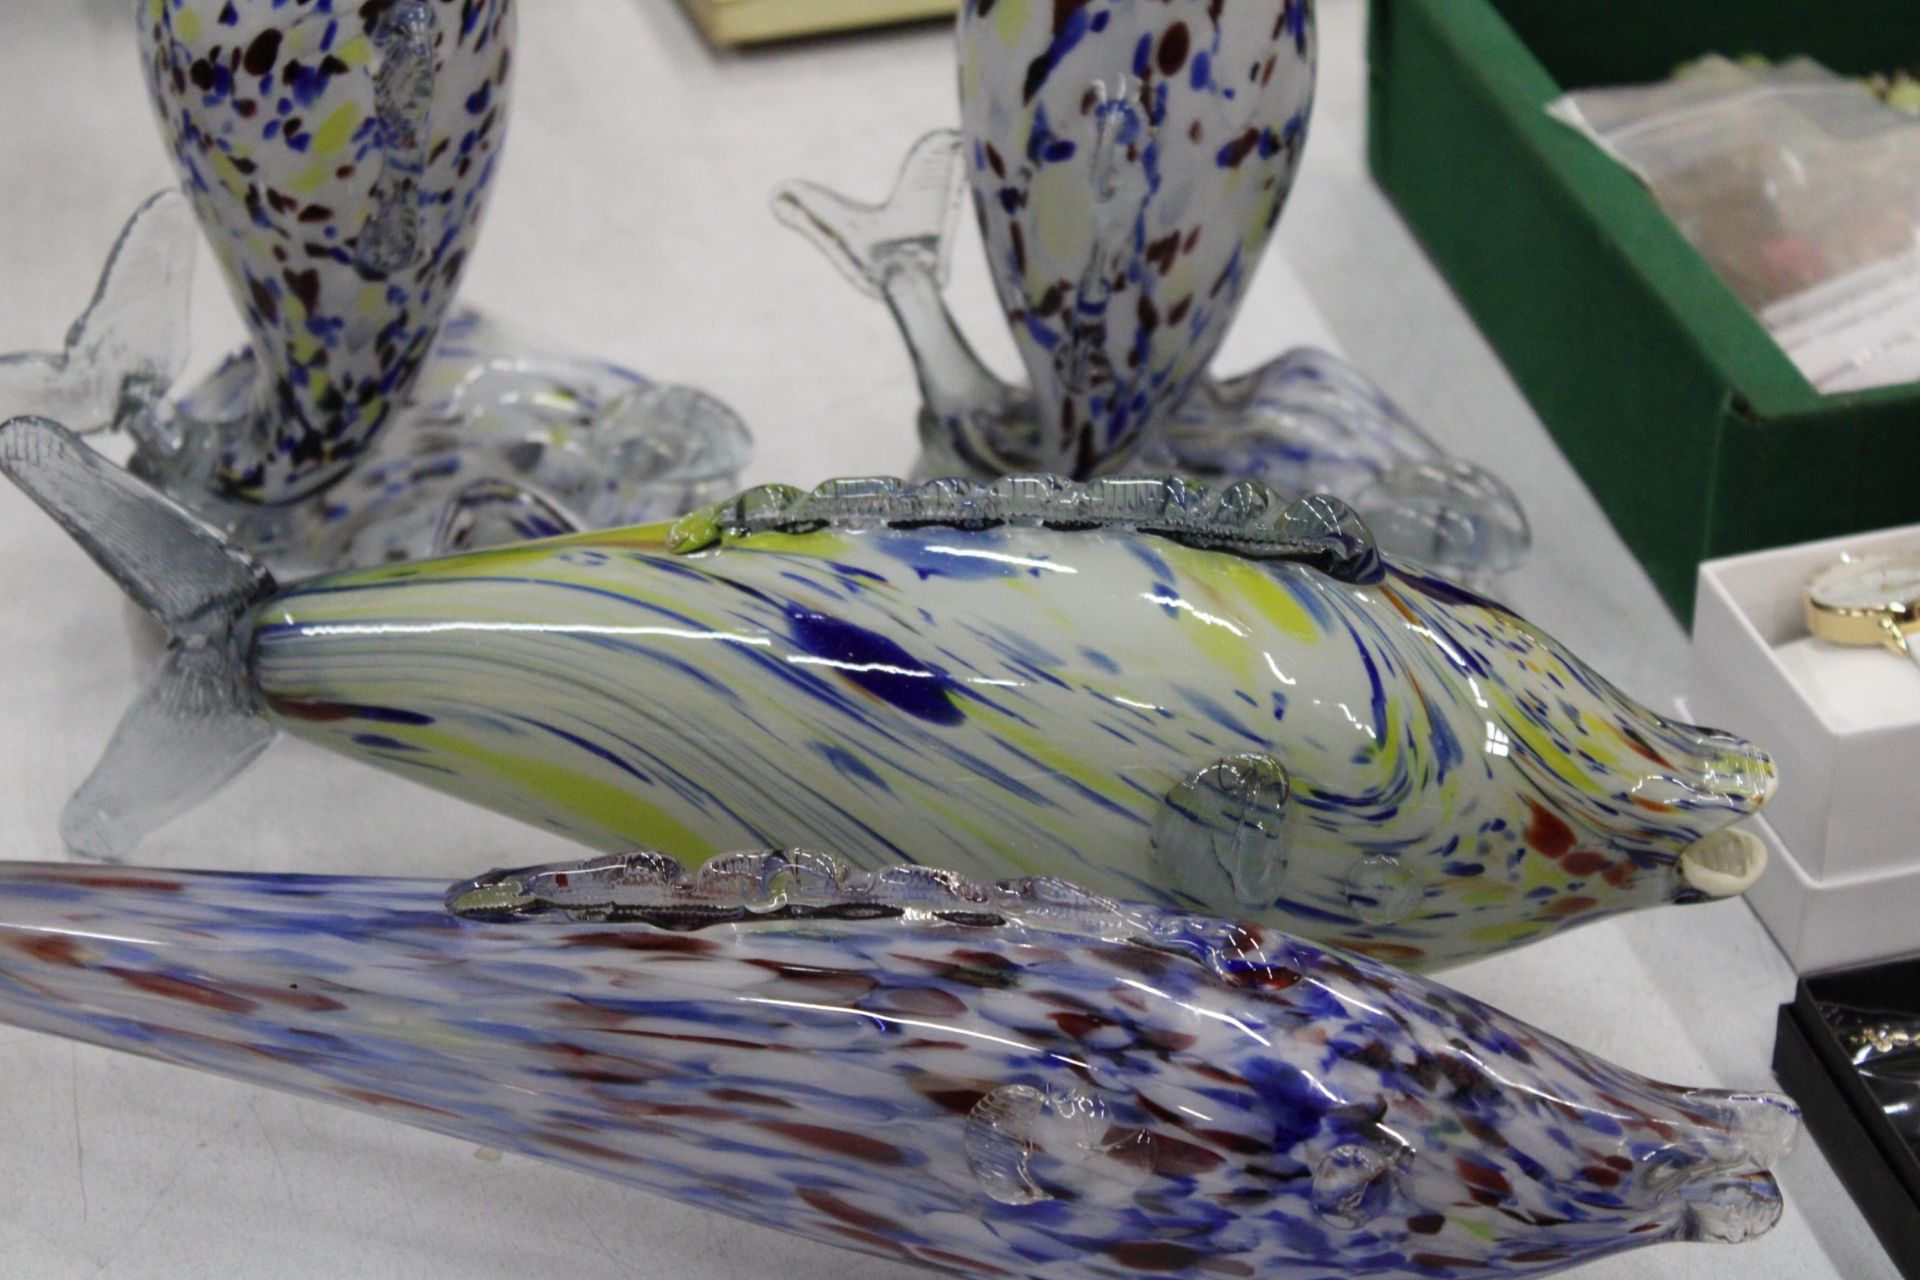 FOUR LARGE MURANO STYLE GLASS FISHES - Image 3 of 6